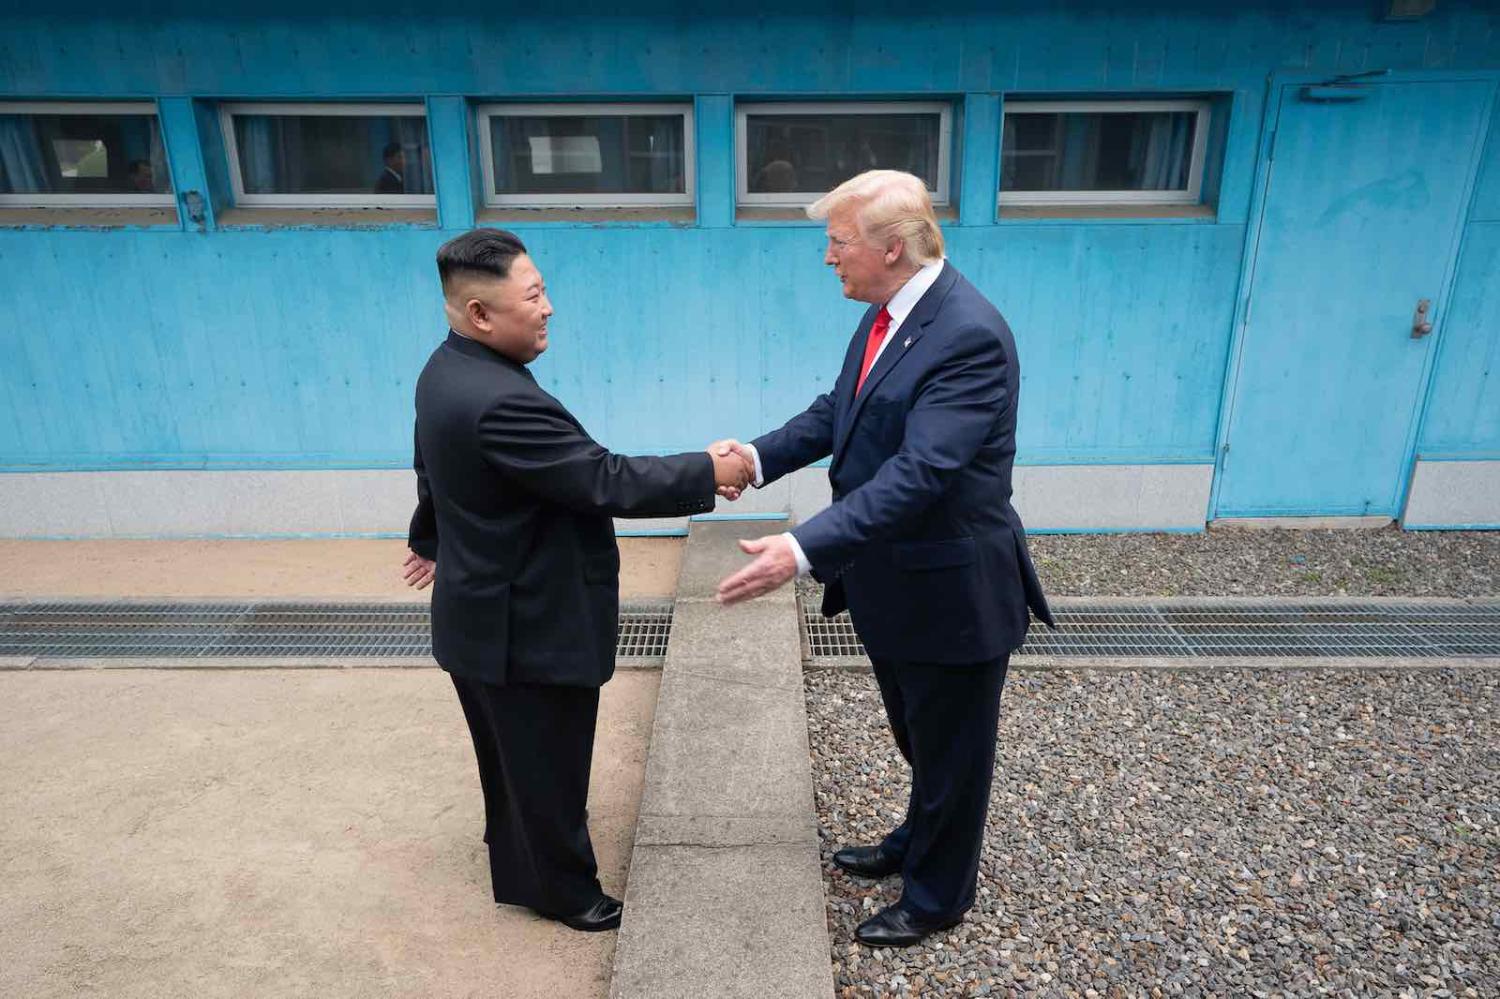 North Korean leader Kim Jong-un shakes hands with US President Donald Trump at the Demilitarized Zone between North and South Korea, 30 June 2019 (Photo: Shealah Craighead/The White House/Flickr)